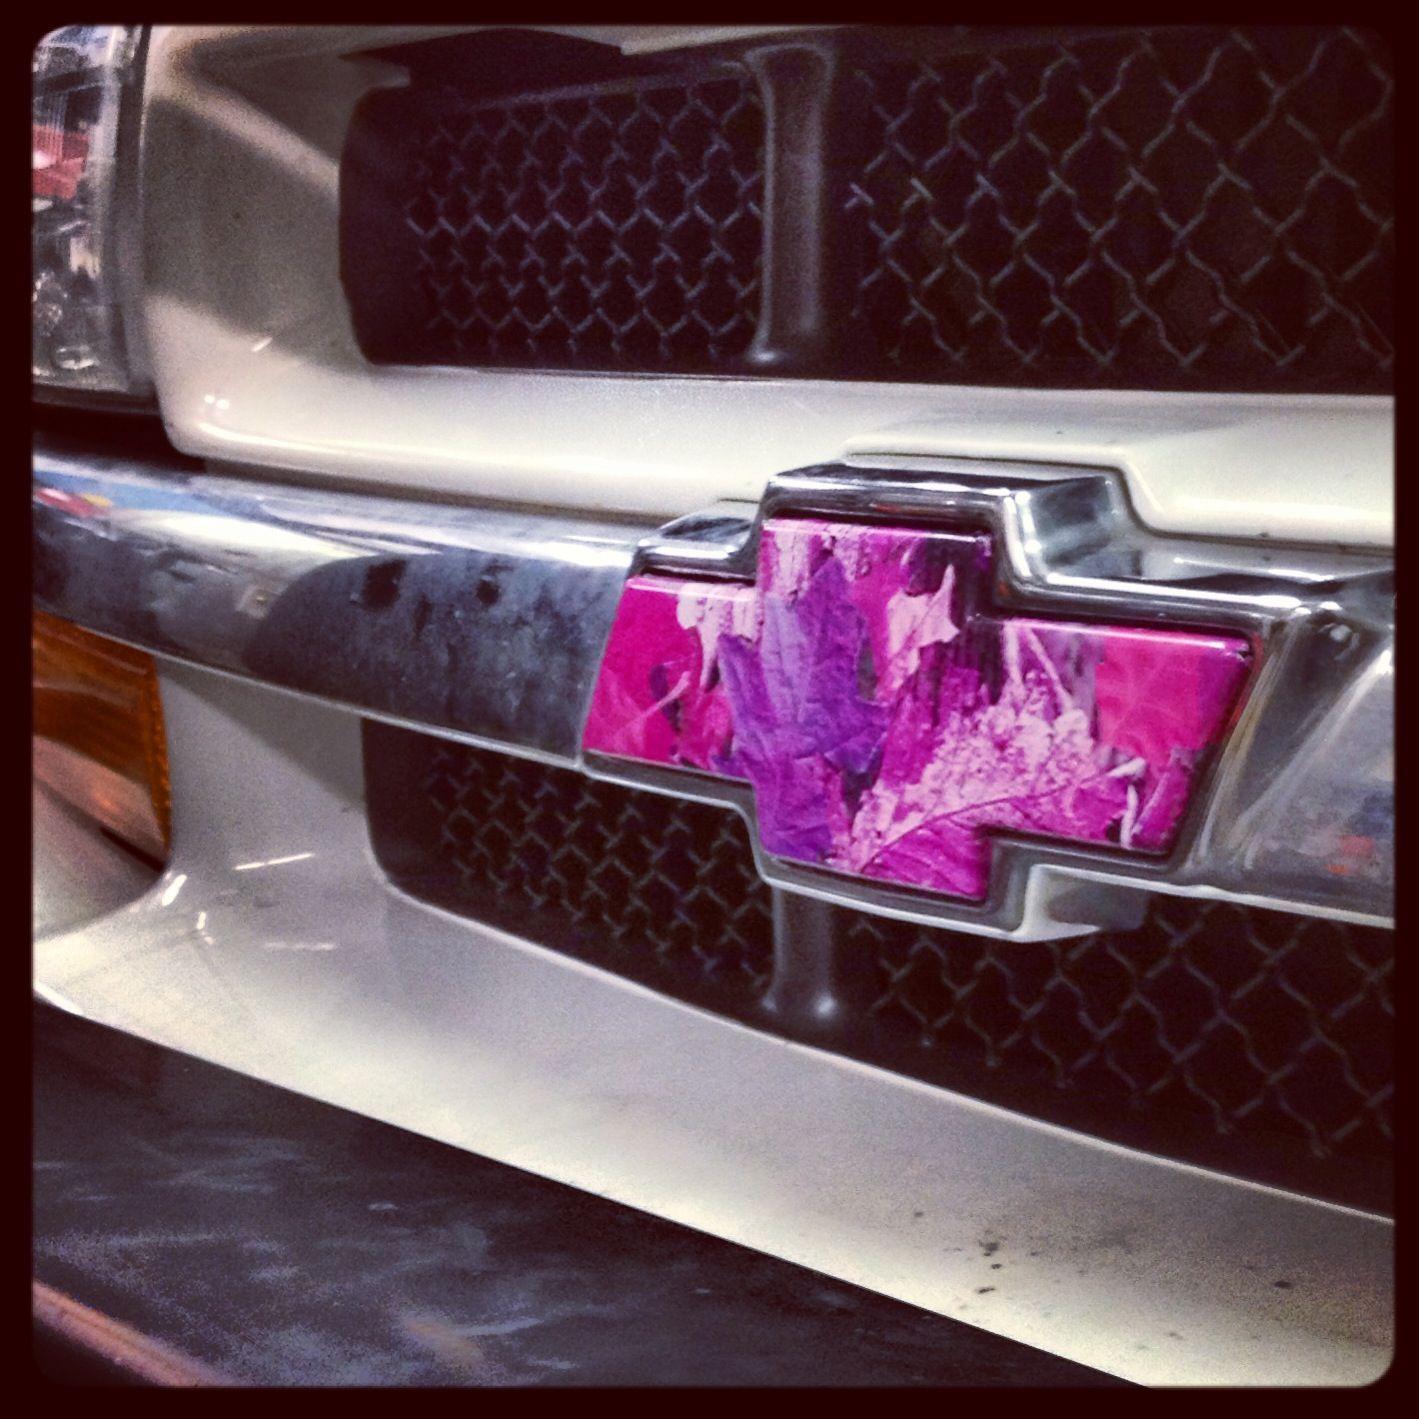 Camo Chevy Logo - Chevy girl, pink camo, Chevy emblem, country girl pick up truck ...